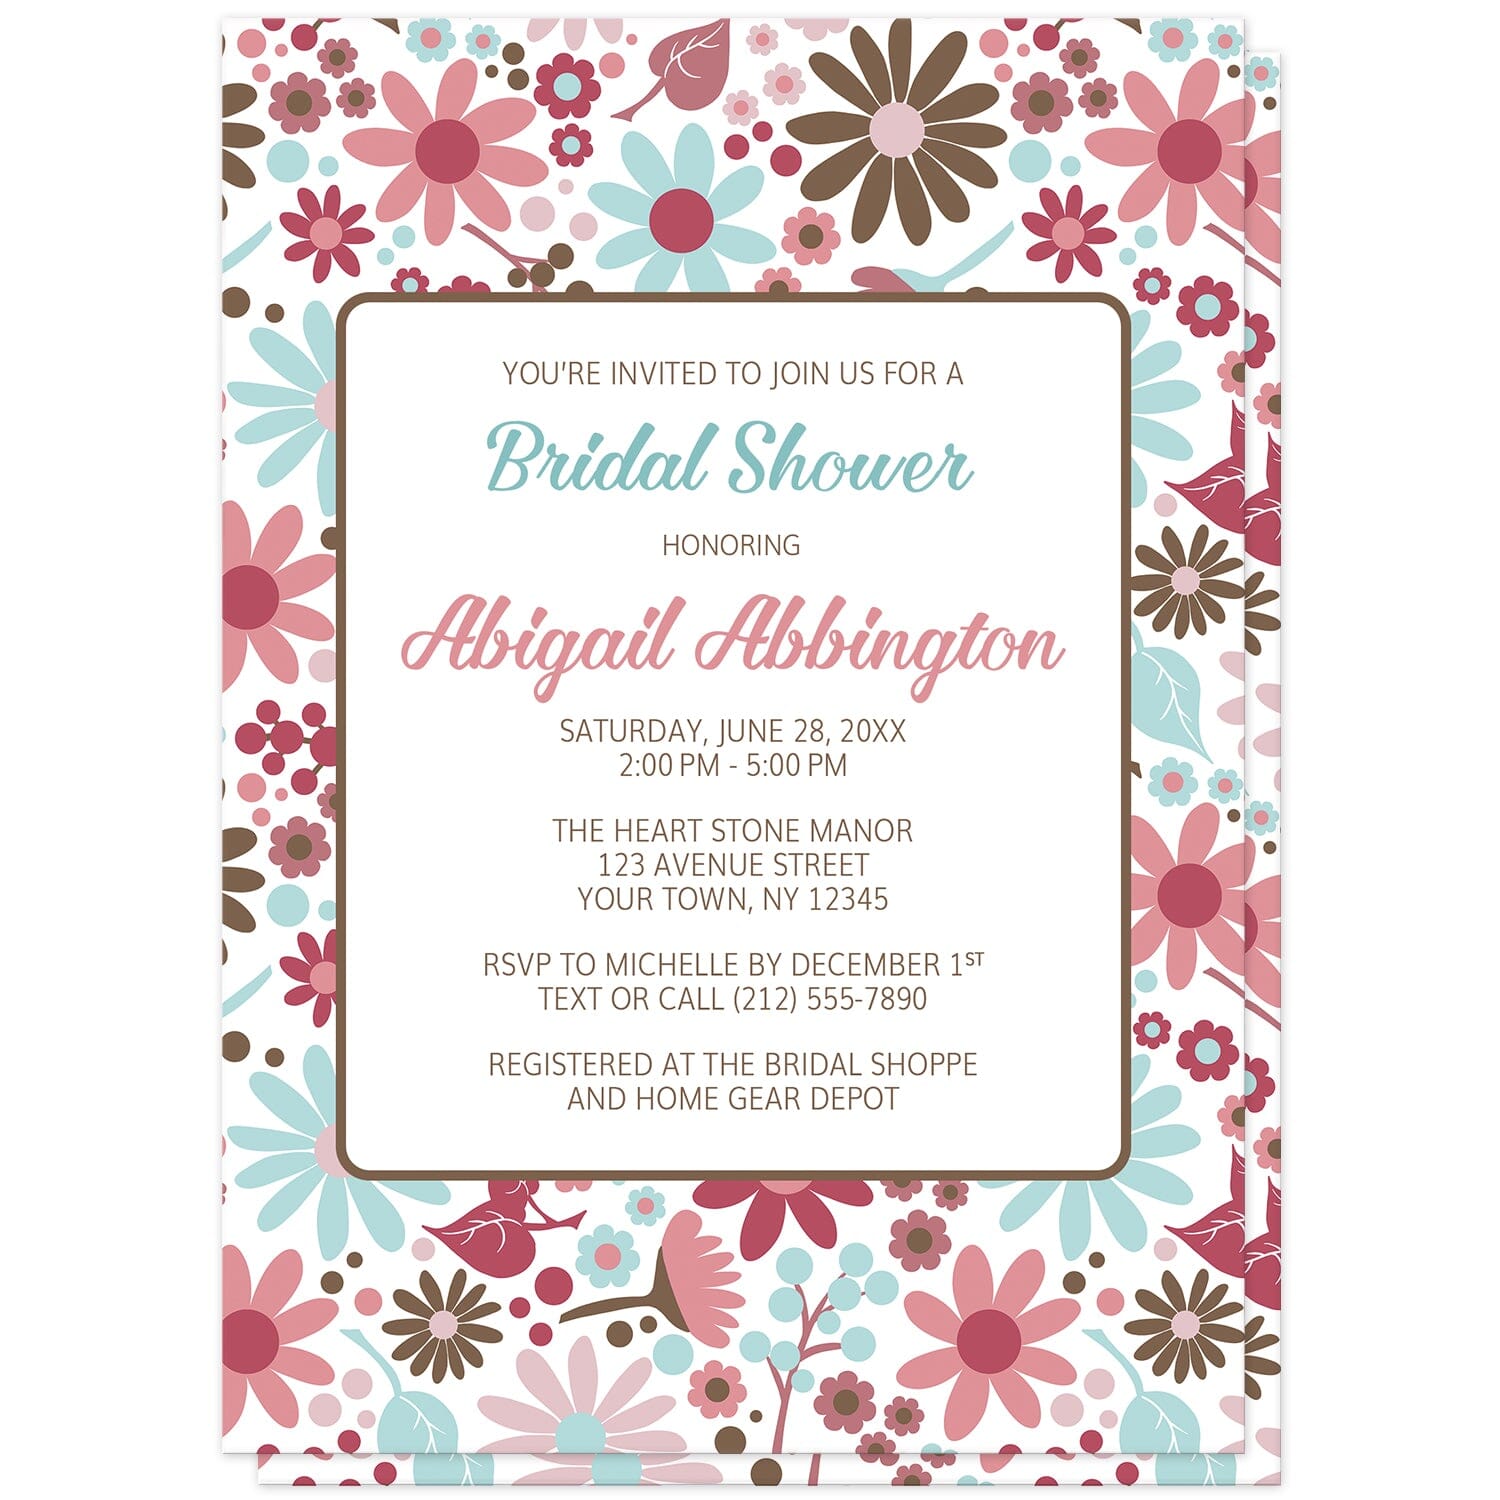 Berry Blue Summer Flowers Bridal Shower Invitations at Artistically Invited. Beautiful berry blue summer flowers bridal shower invitations designed with a pretty summer floral pattern in different hues of berry pink with blue and brown. Your personalized bridal shower celebration details are custom printed in blue, pink, and brown on white over the flowers pattern. 